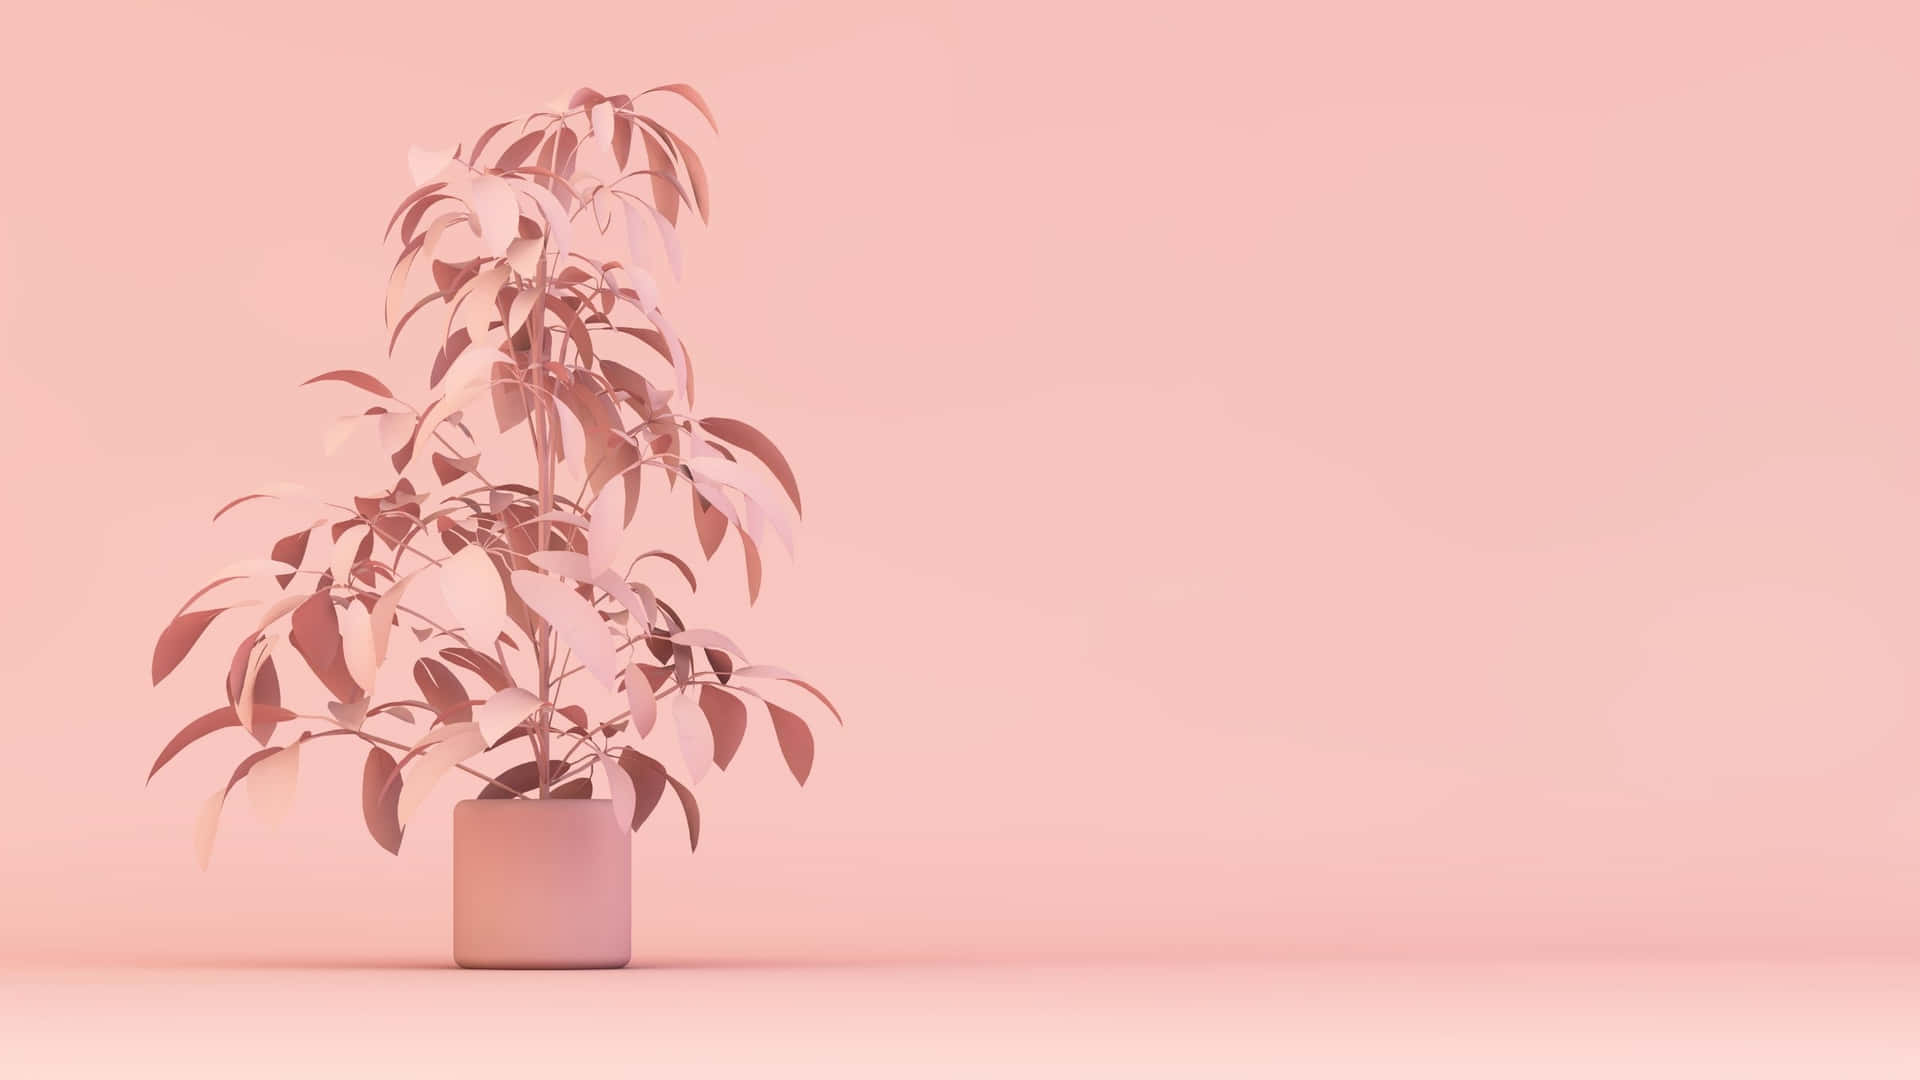 "Pink Aesthetic Blooming on Your Computer Screen" Wallpaper